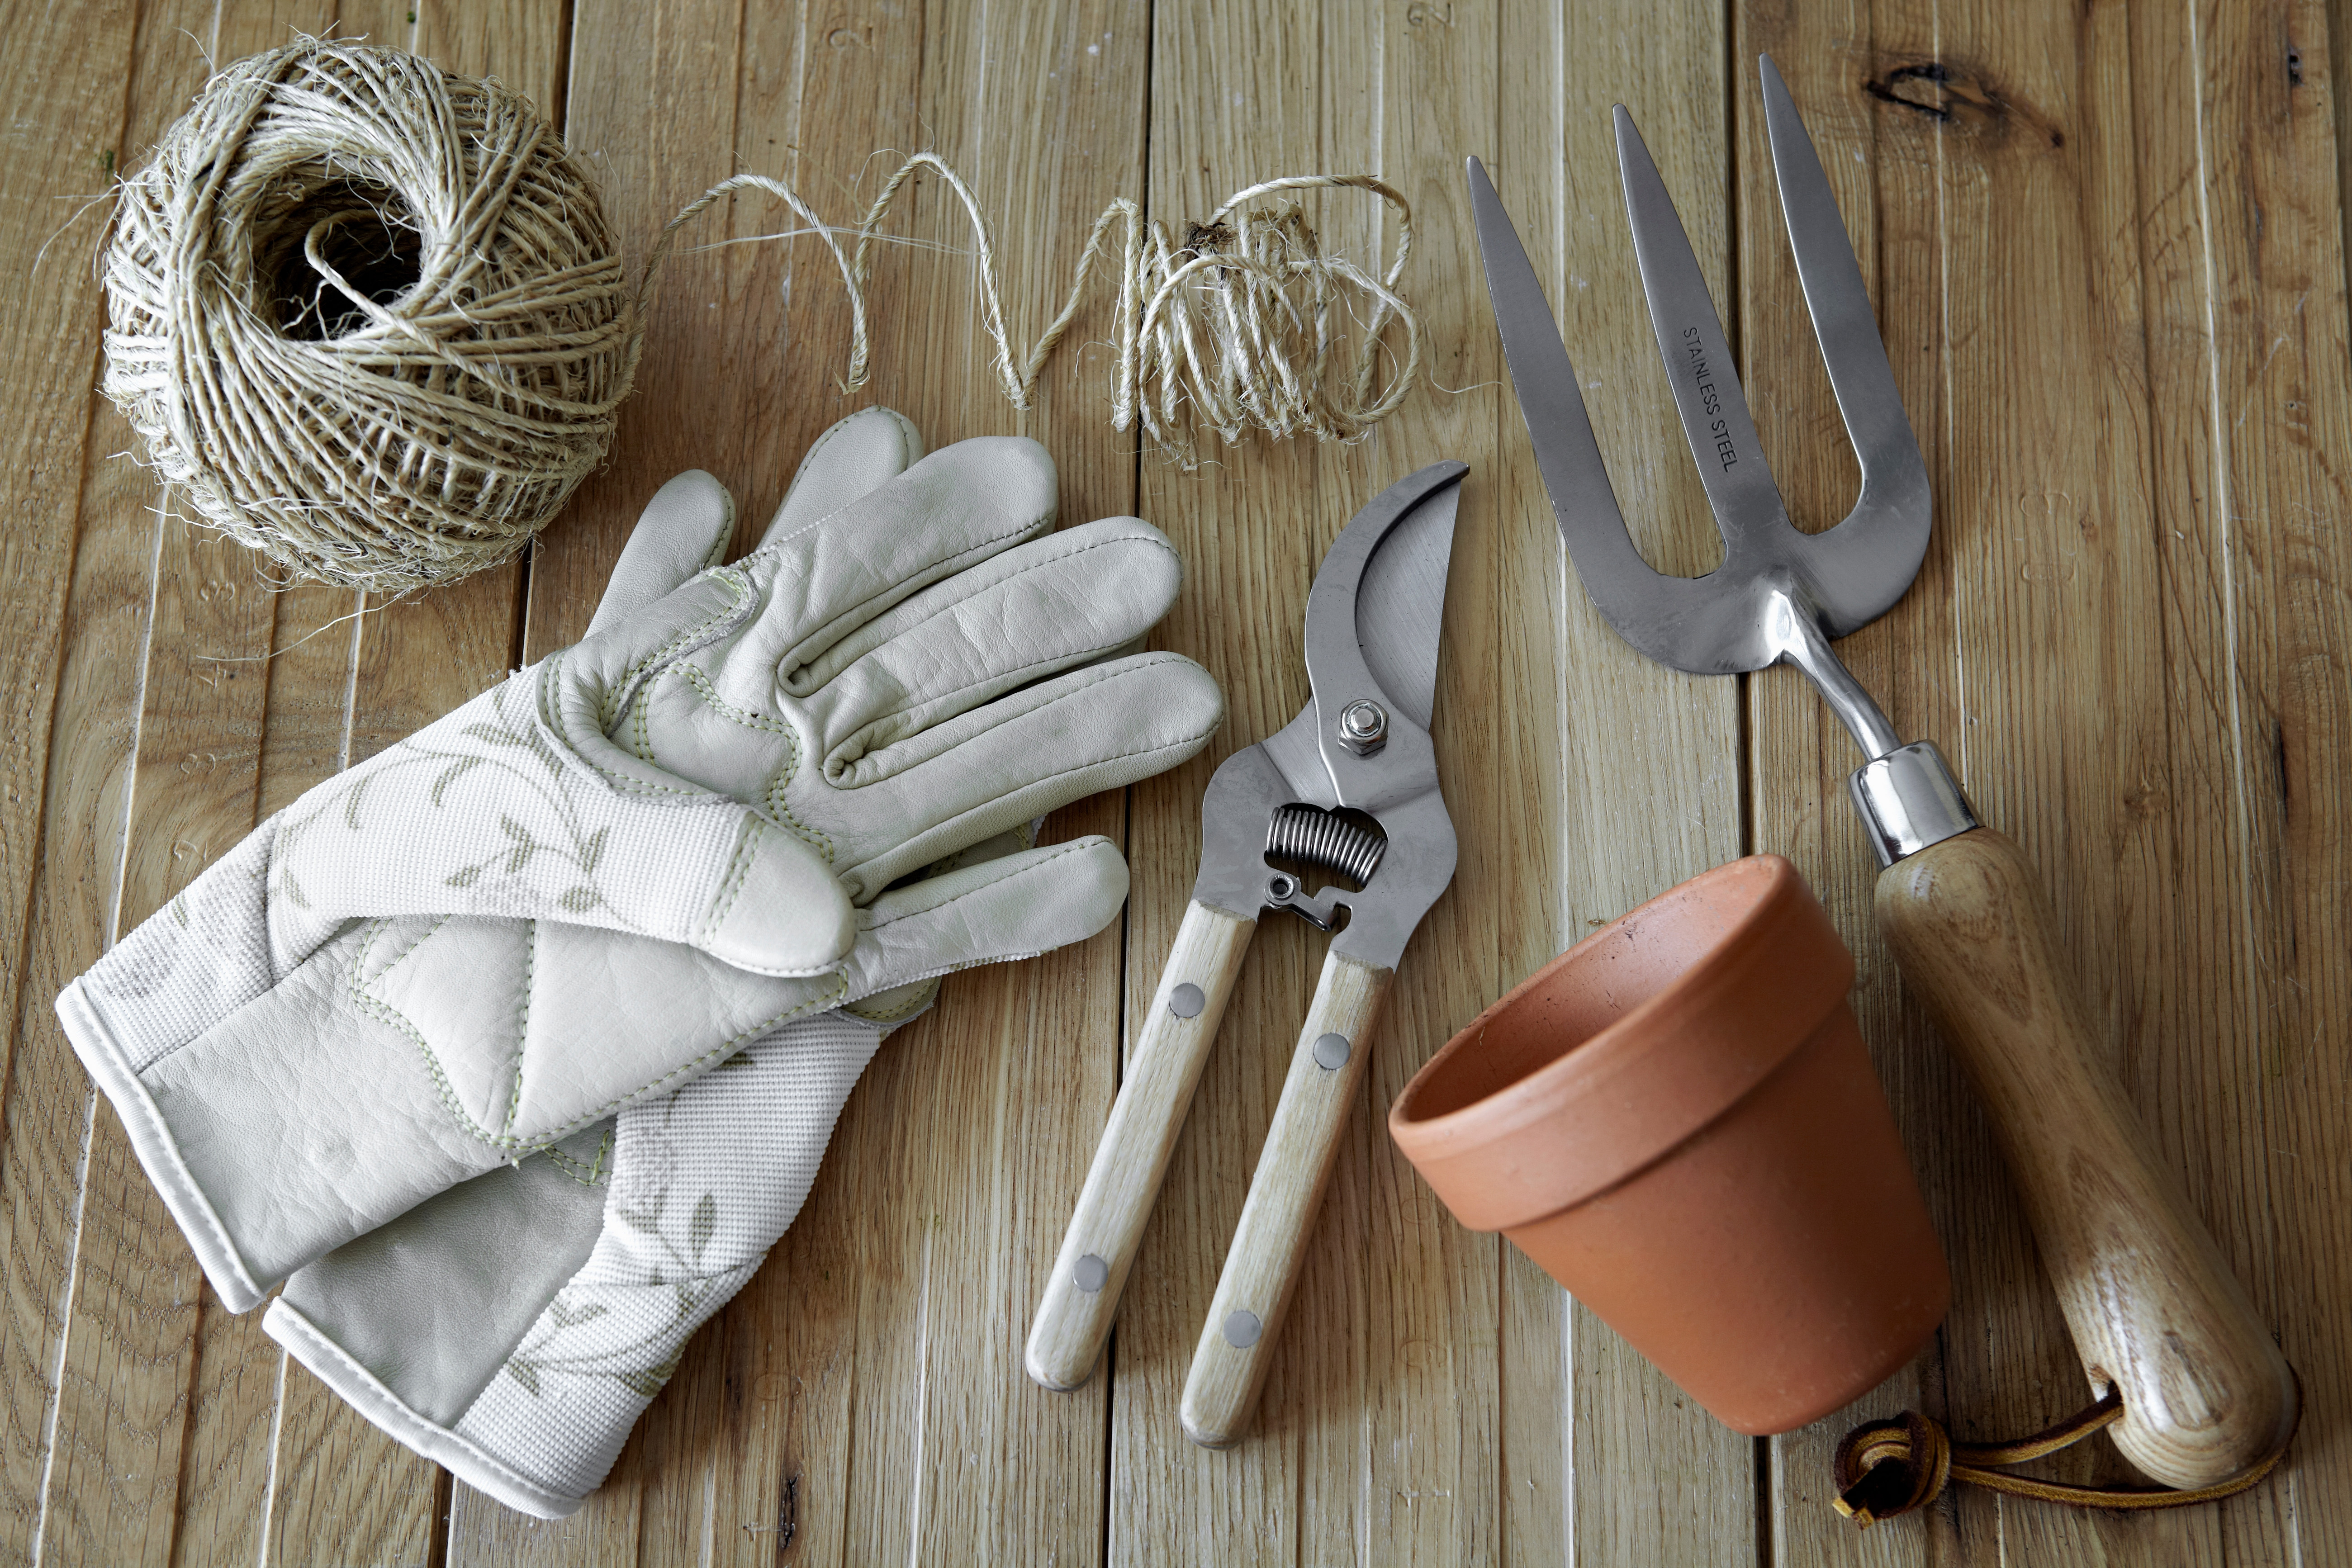 10 DIY Home Improvements for $20 or Less